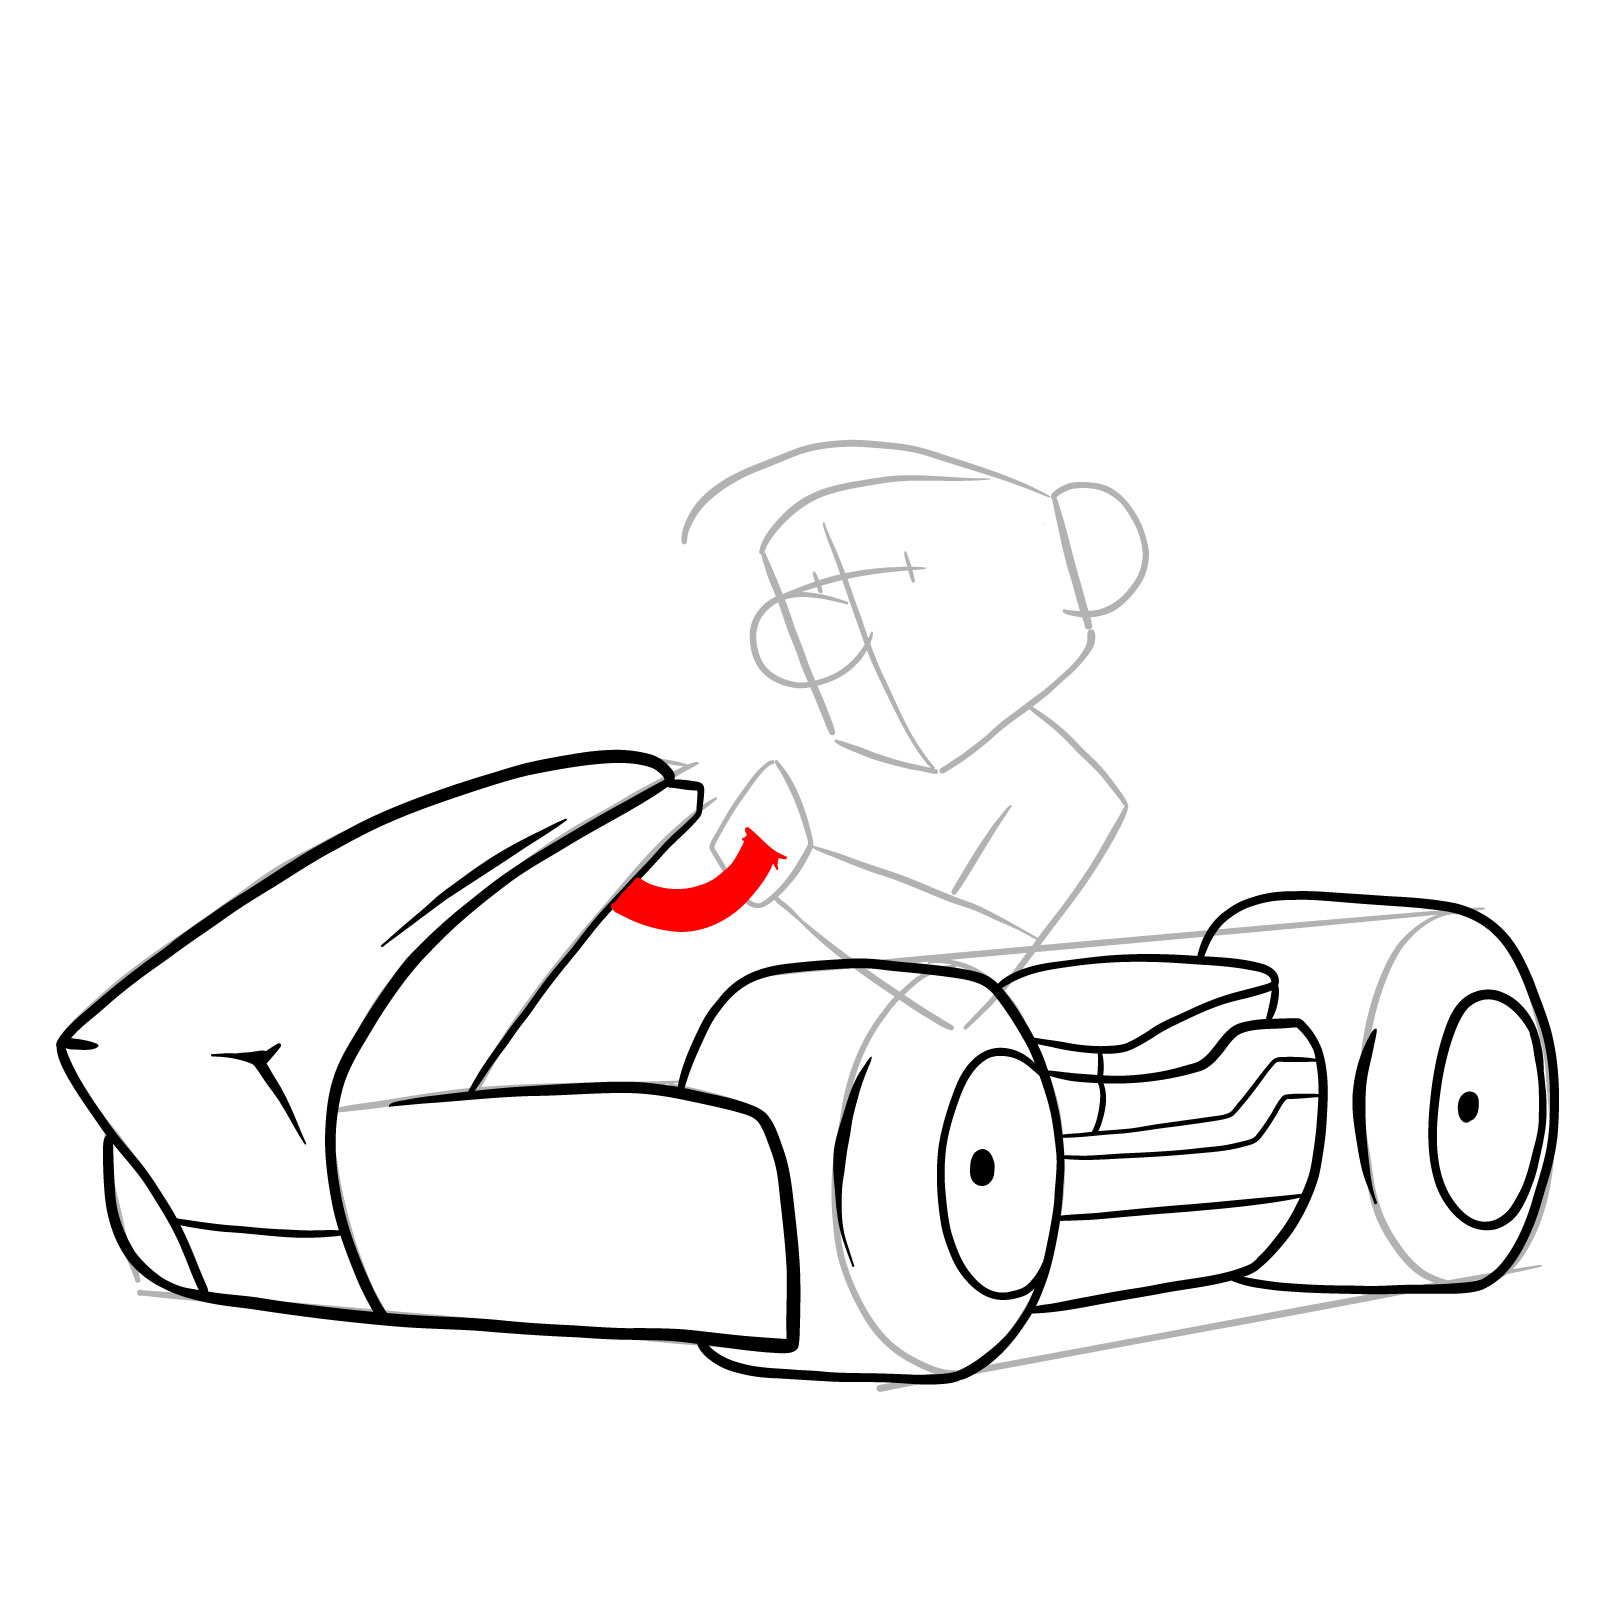 How to draw Race Traitors Mario - step 15